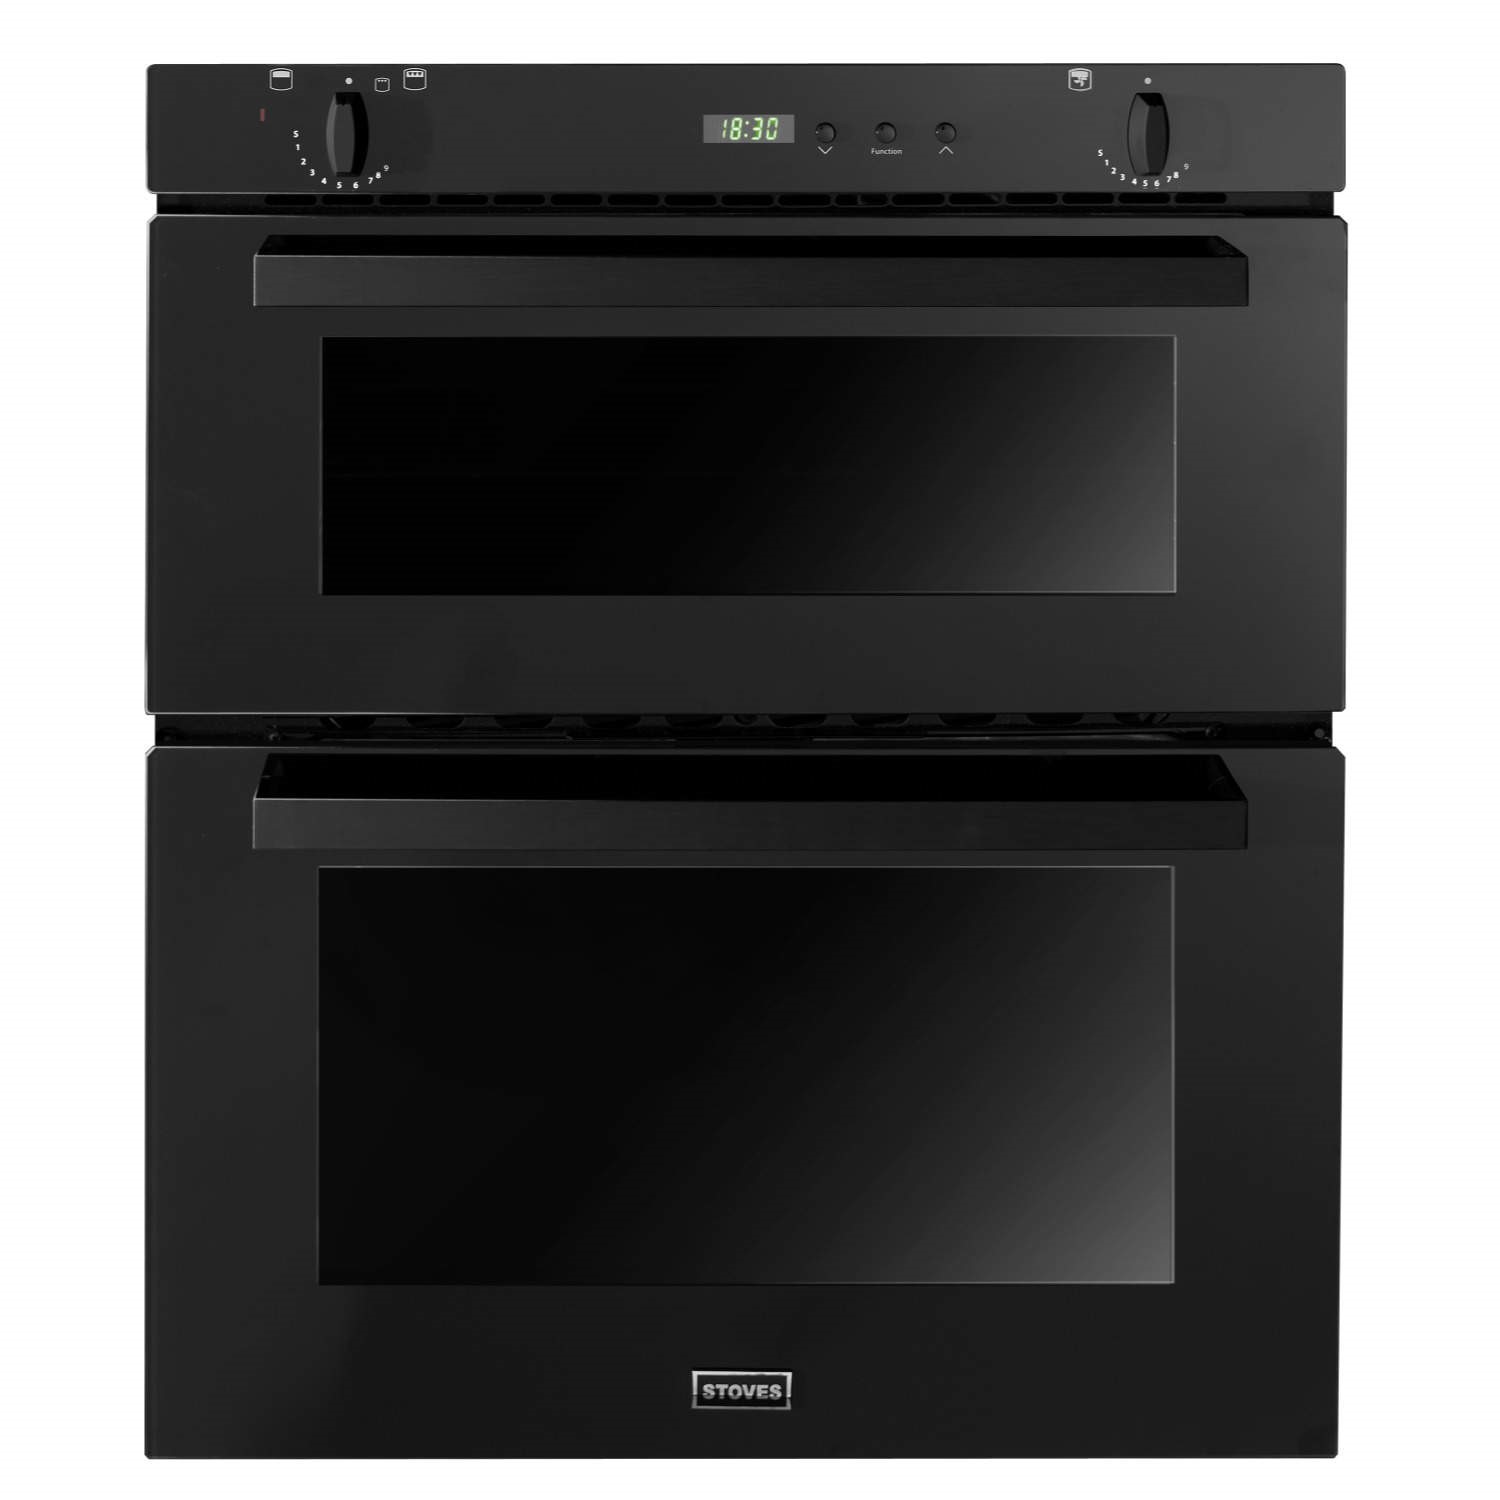 Stoves SGB700PS Built Under Gas Double Oven - Black